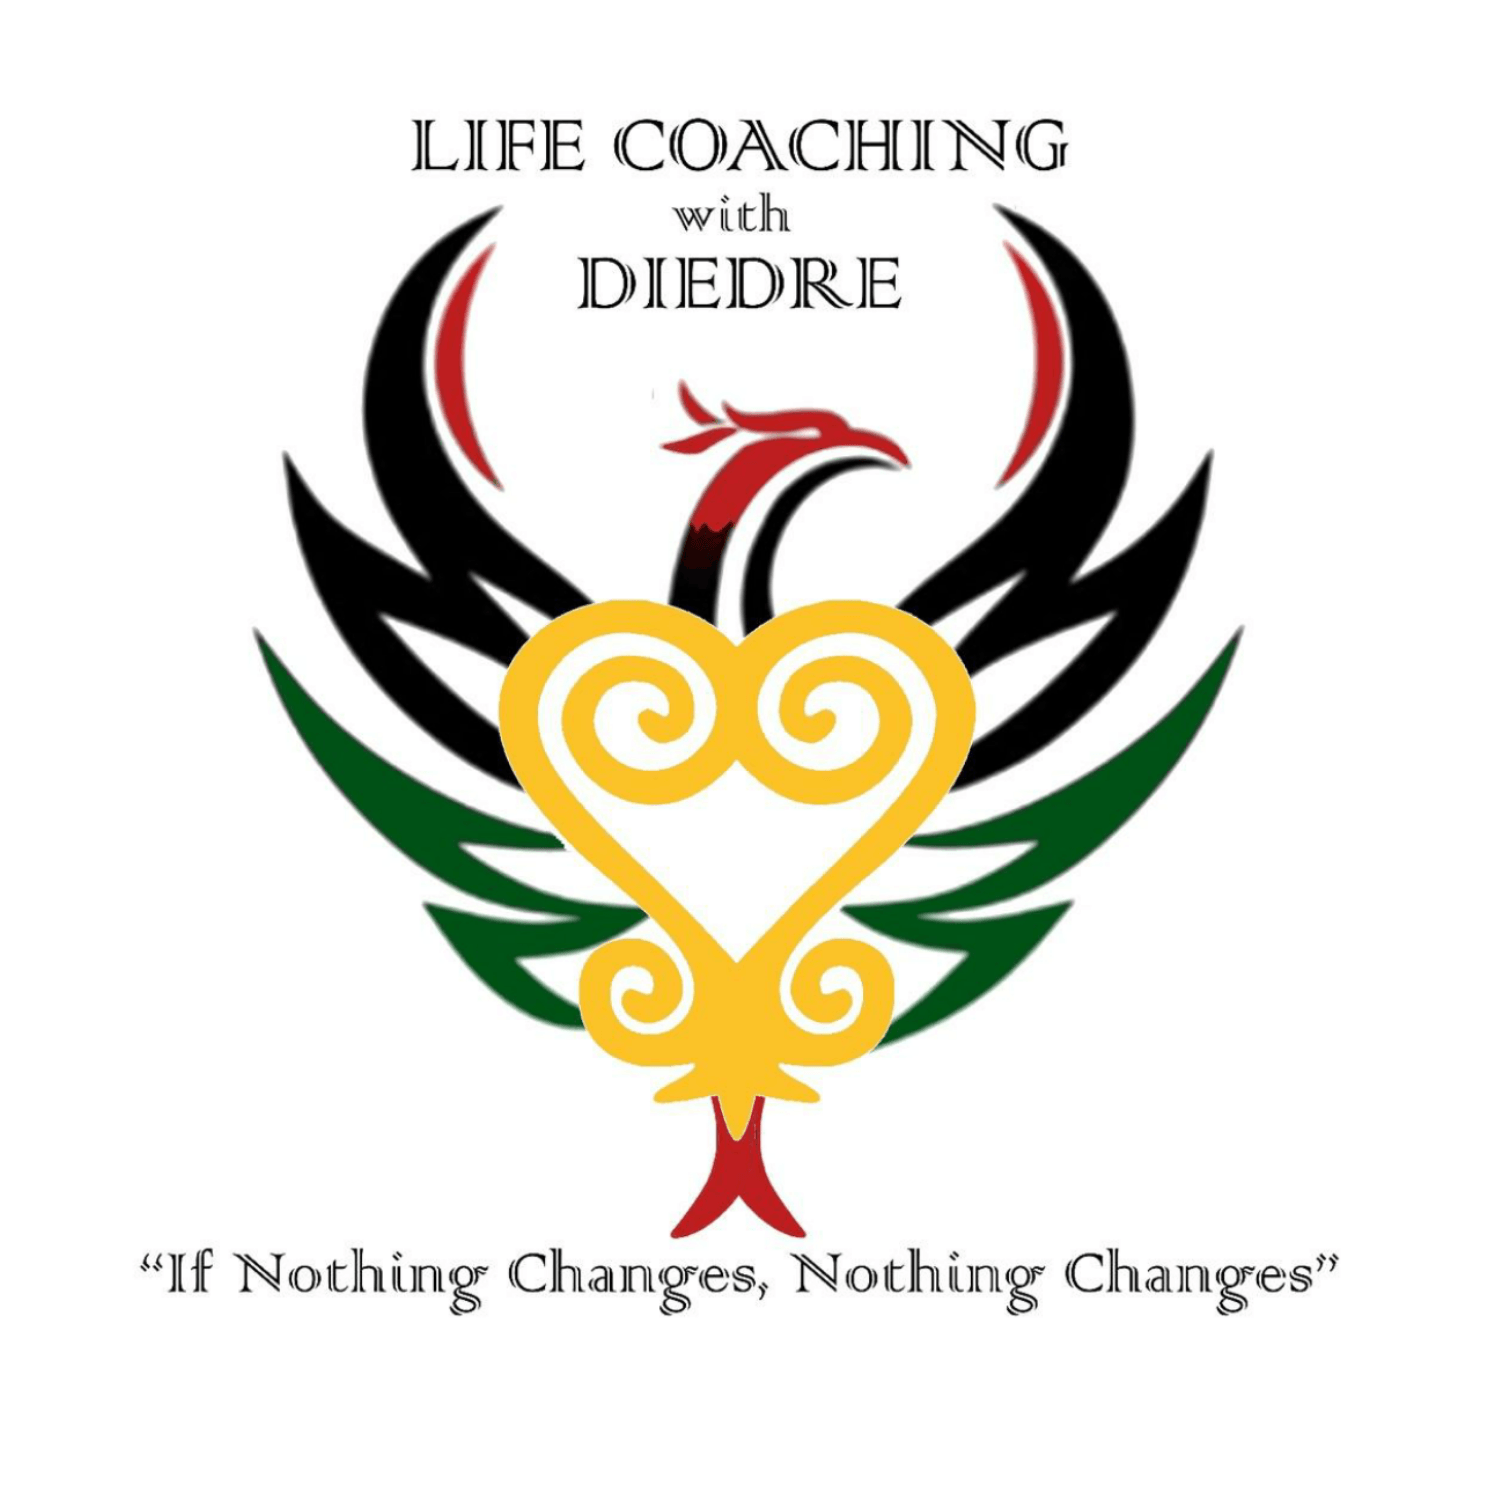 A logo for life coaching with diedre with a bird and a heart